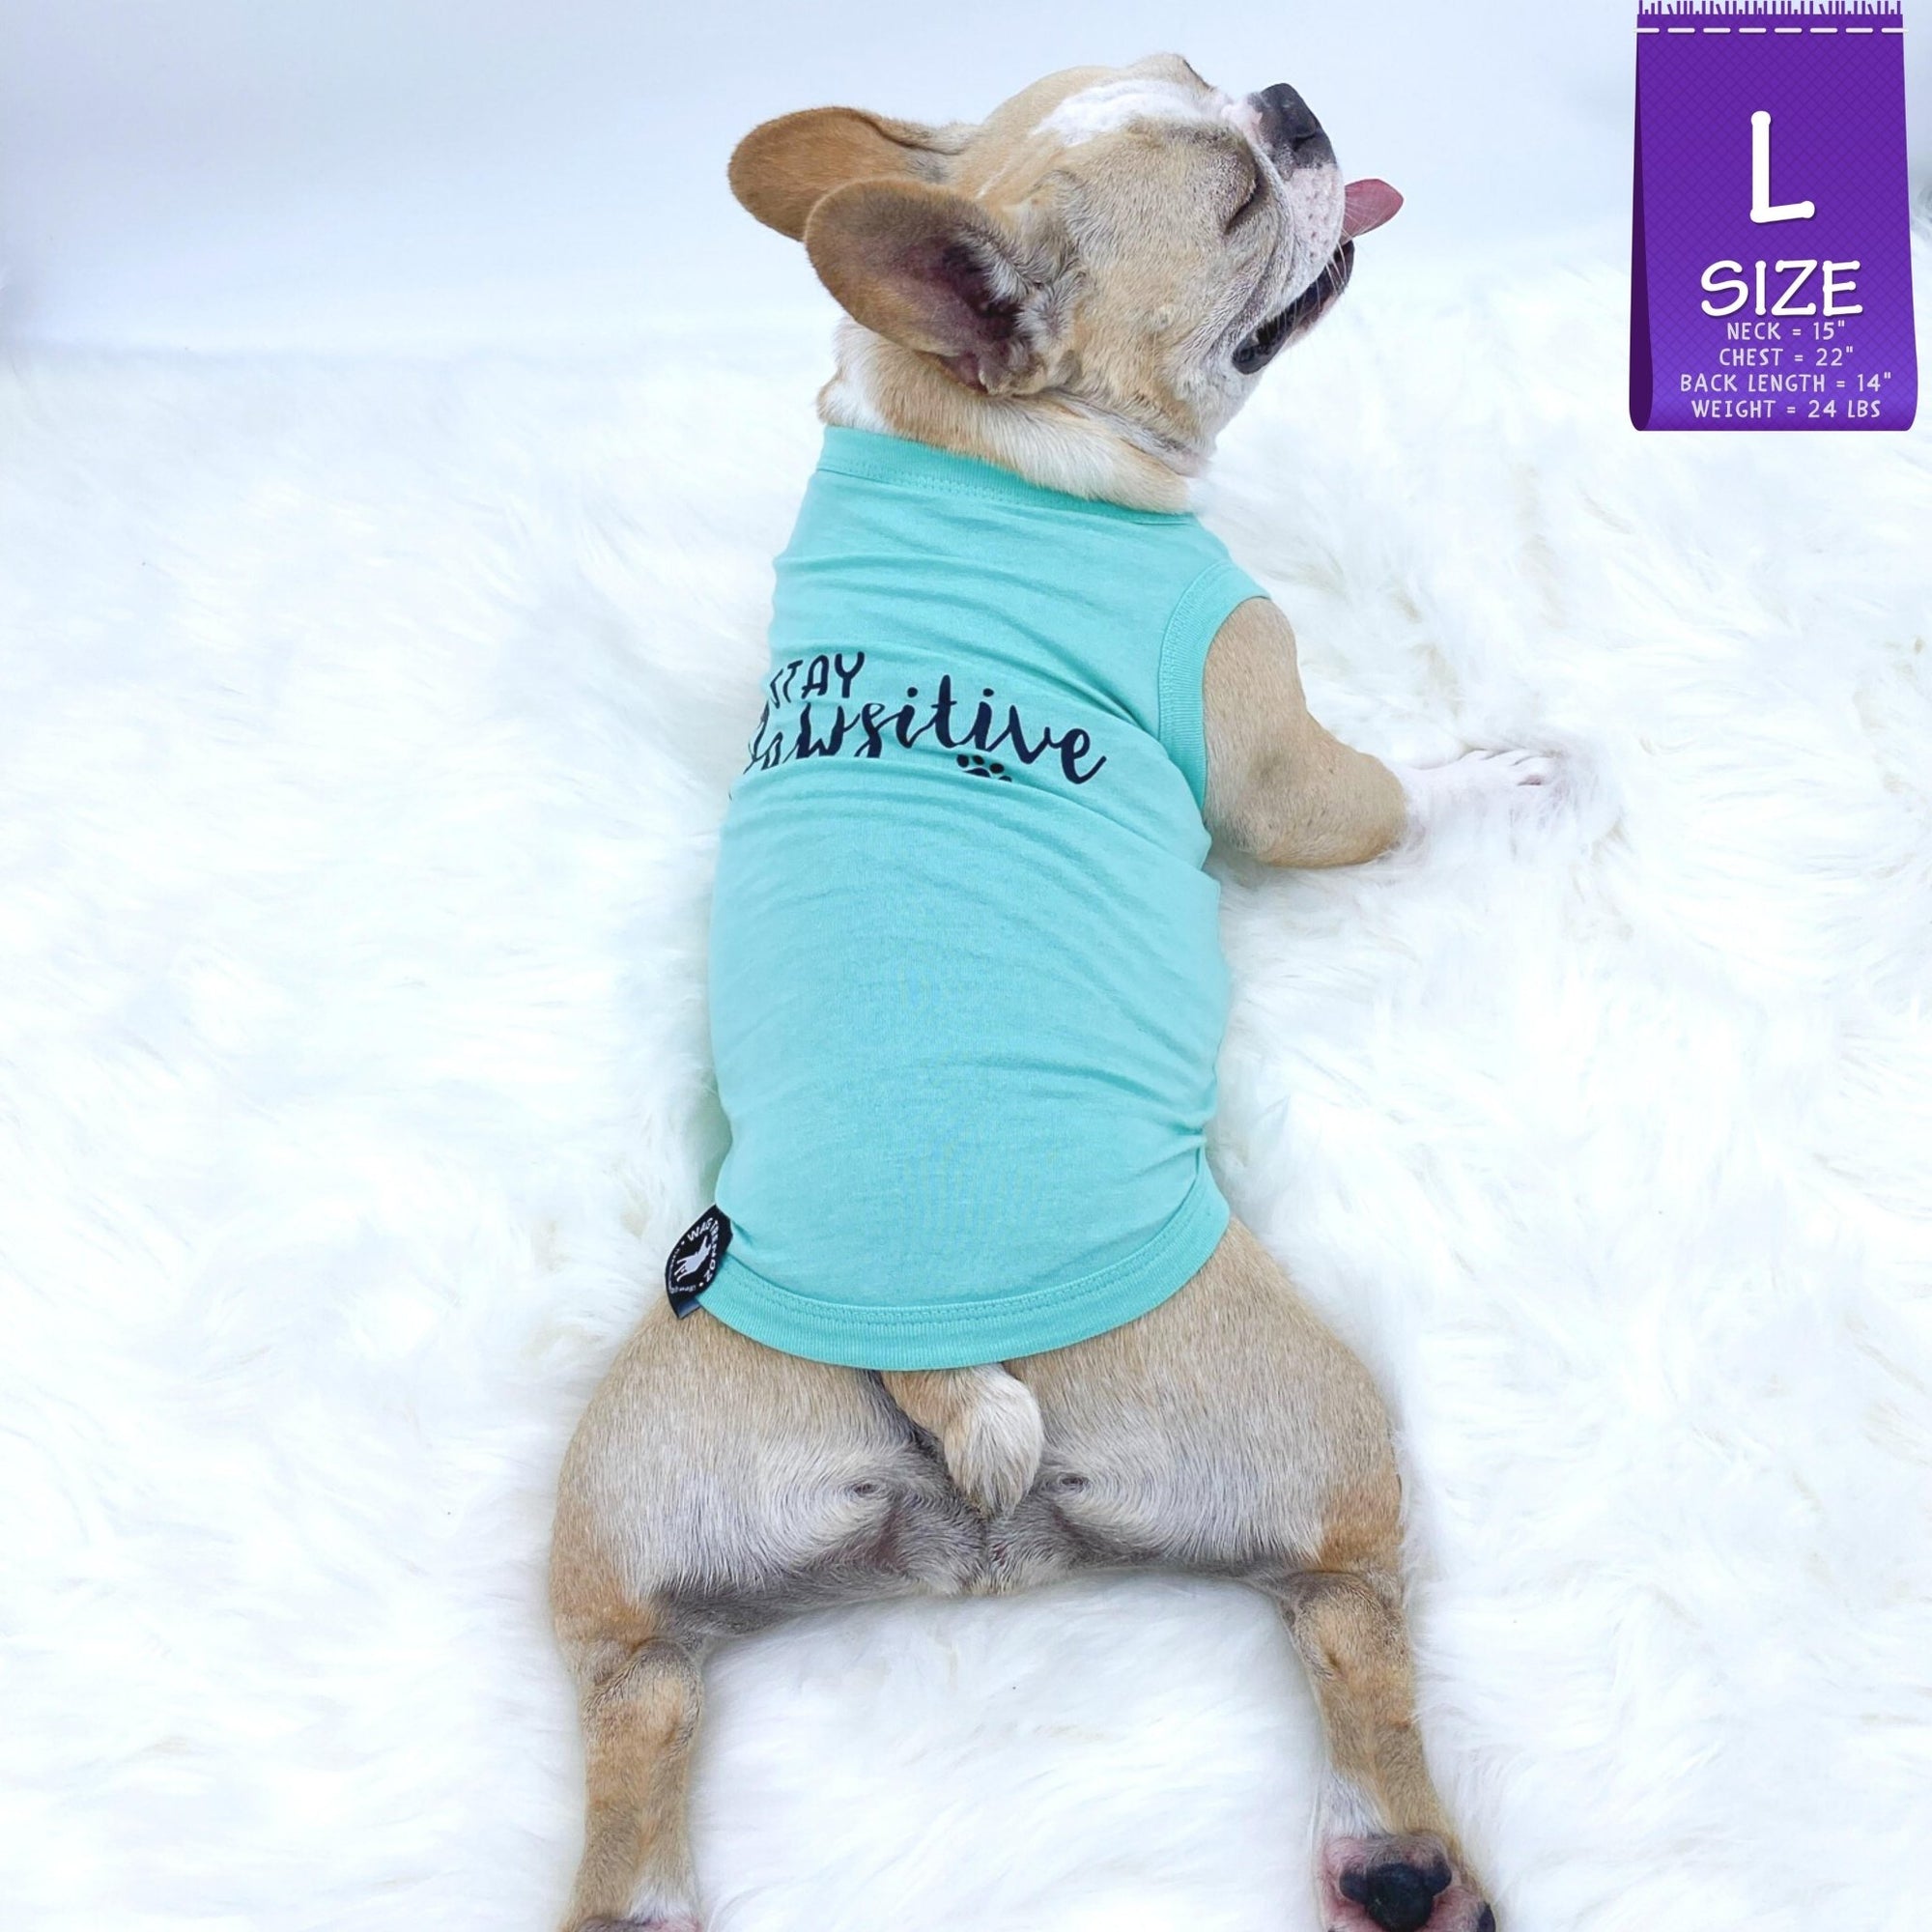 Dog T-Shirt - French Bulldog laying down panting wearing &quot;Stay Pawsitive&quot; teal dog t-shirt - with &quot;Stay Pawsitive&quot; lettering in black on back - against solid white background - Wag Trendz